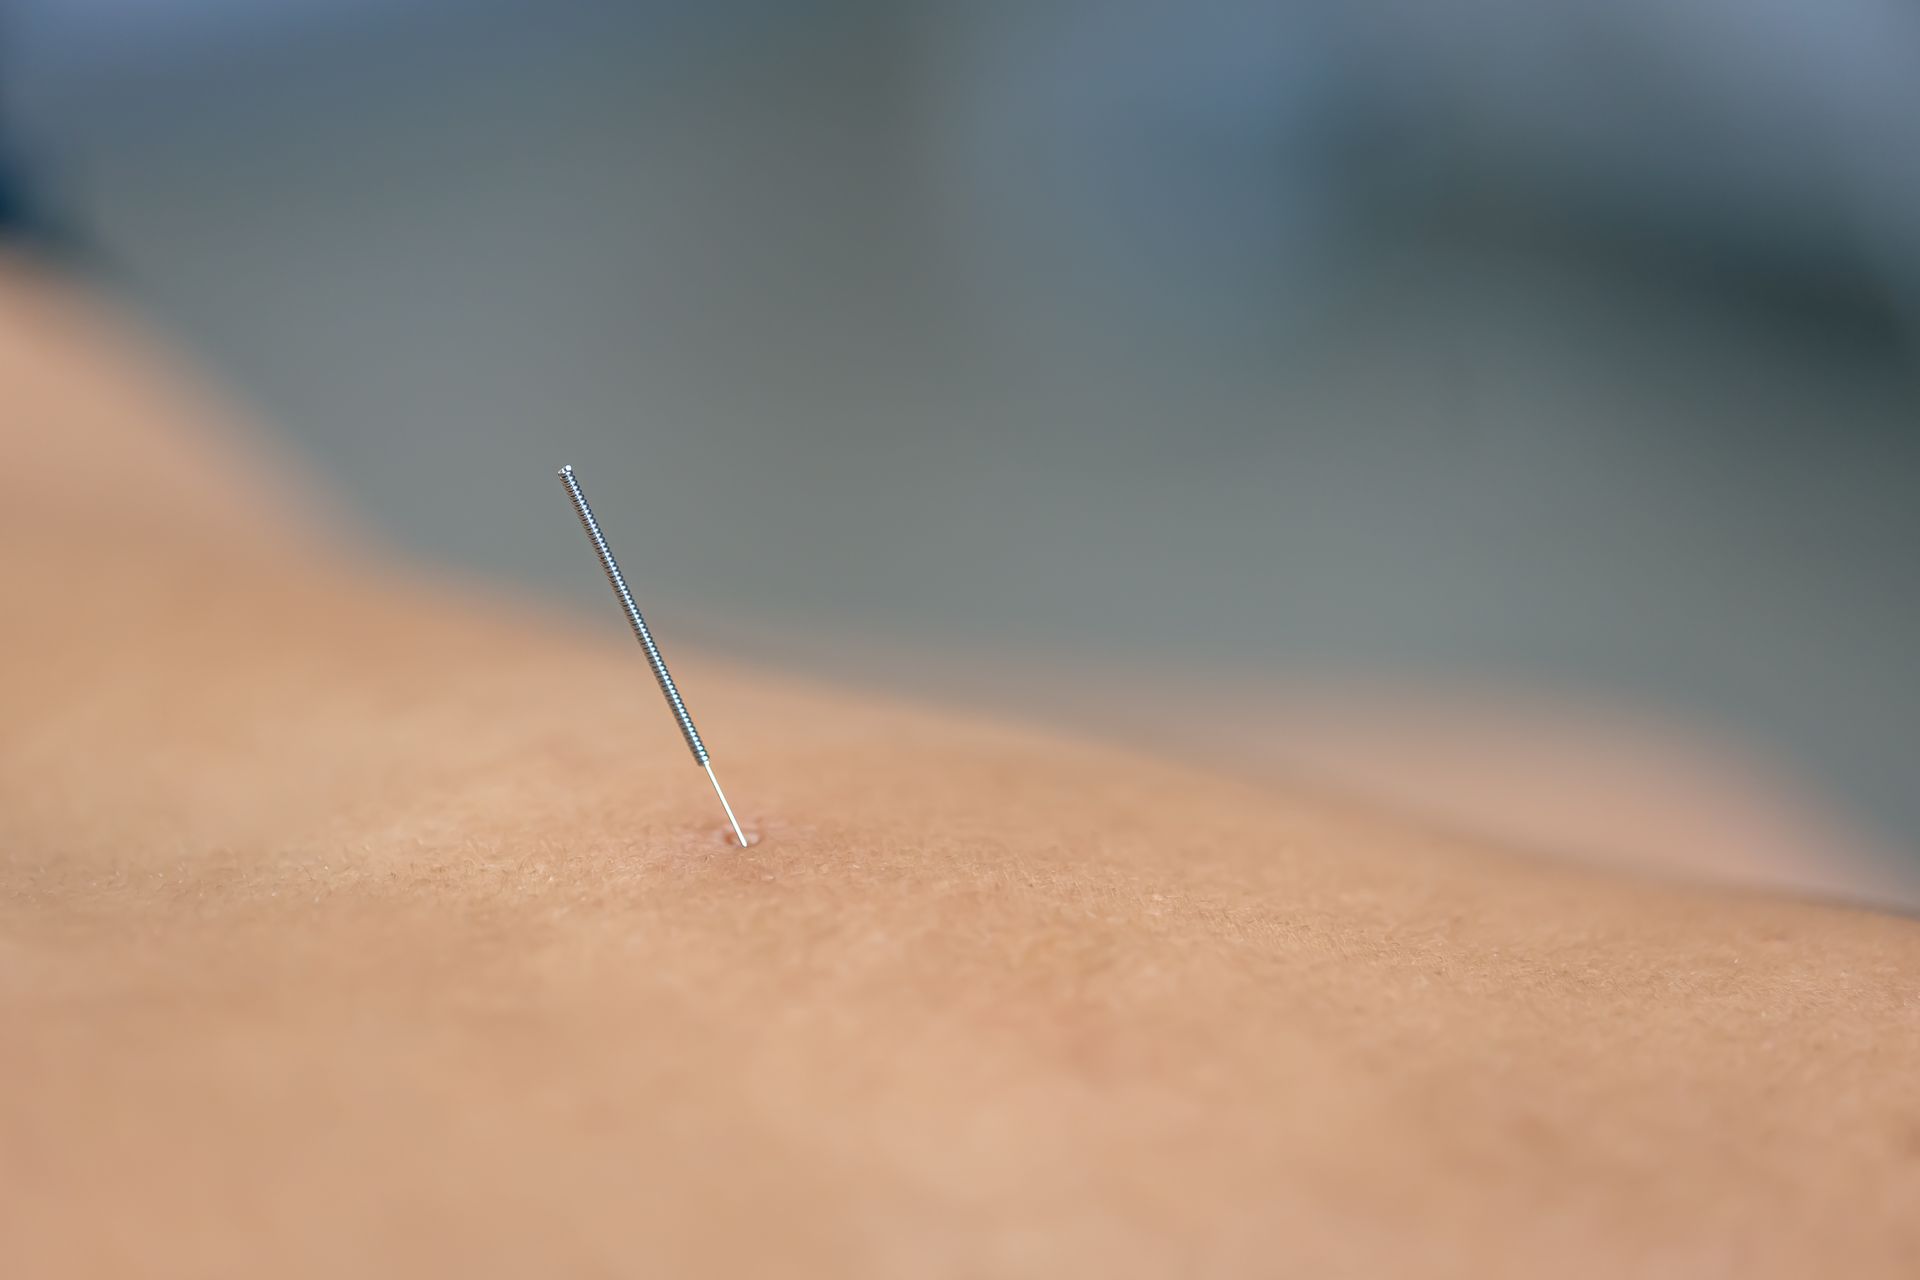 a close up of an acupuncture needle in a person 's skin